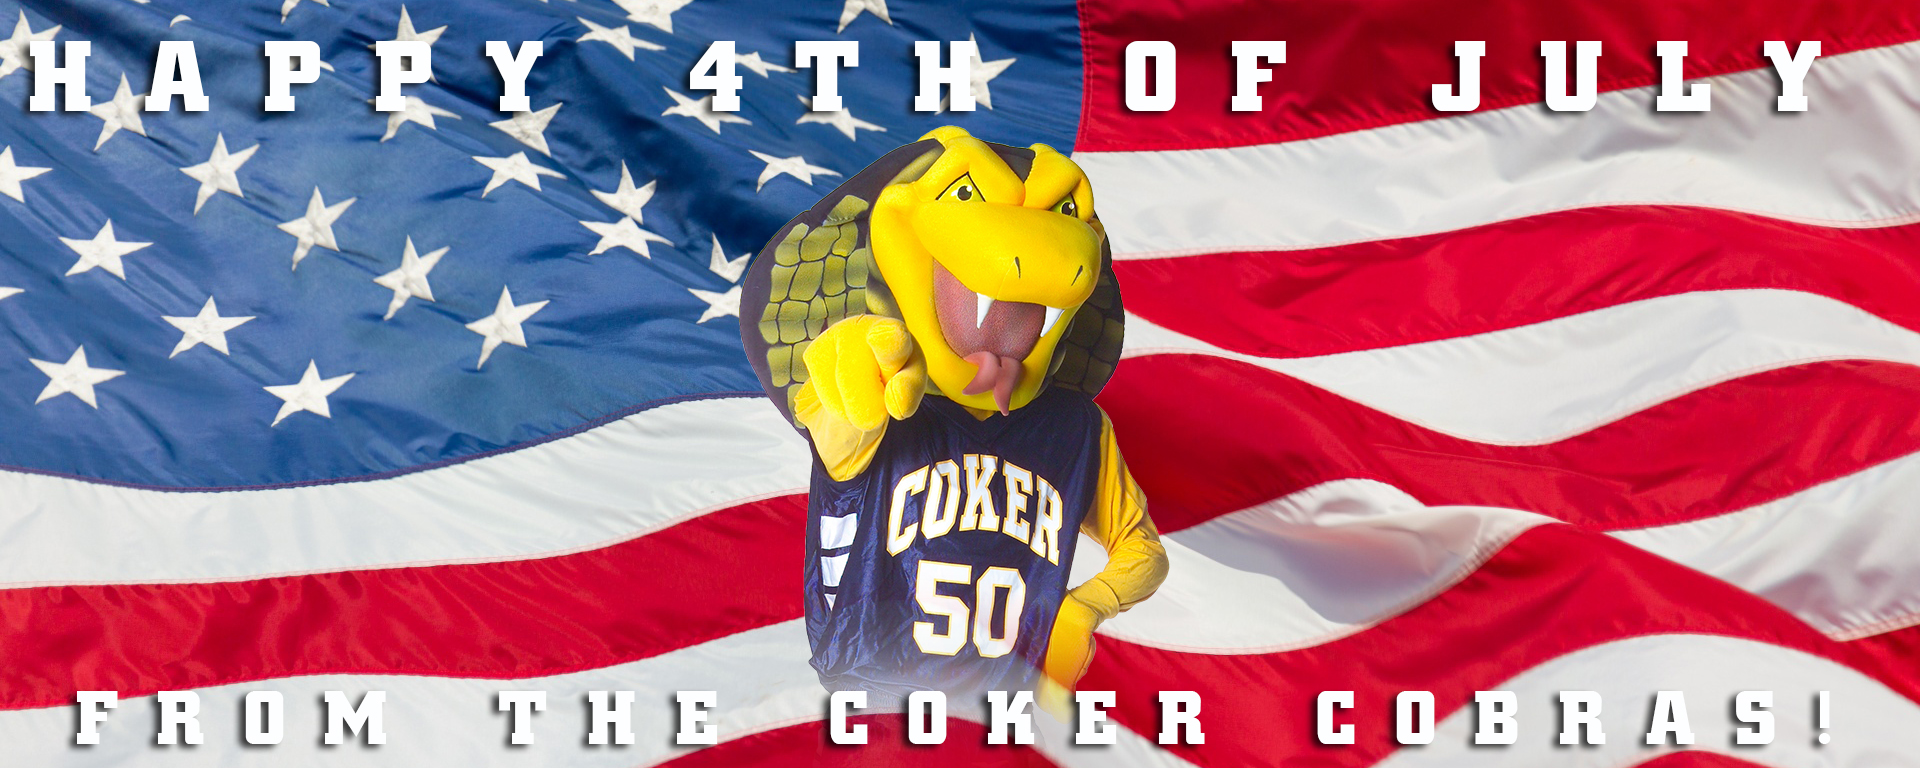 Happy Fourth of July from the Coker Cobras!